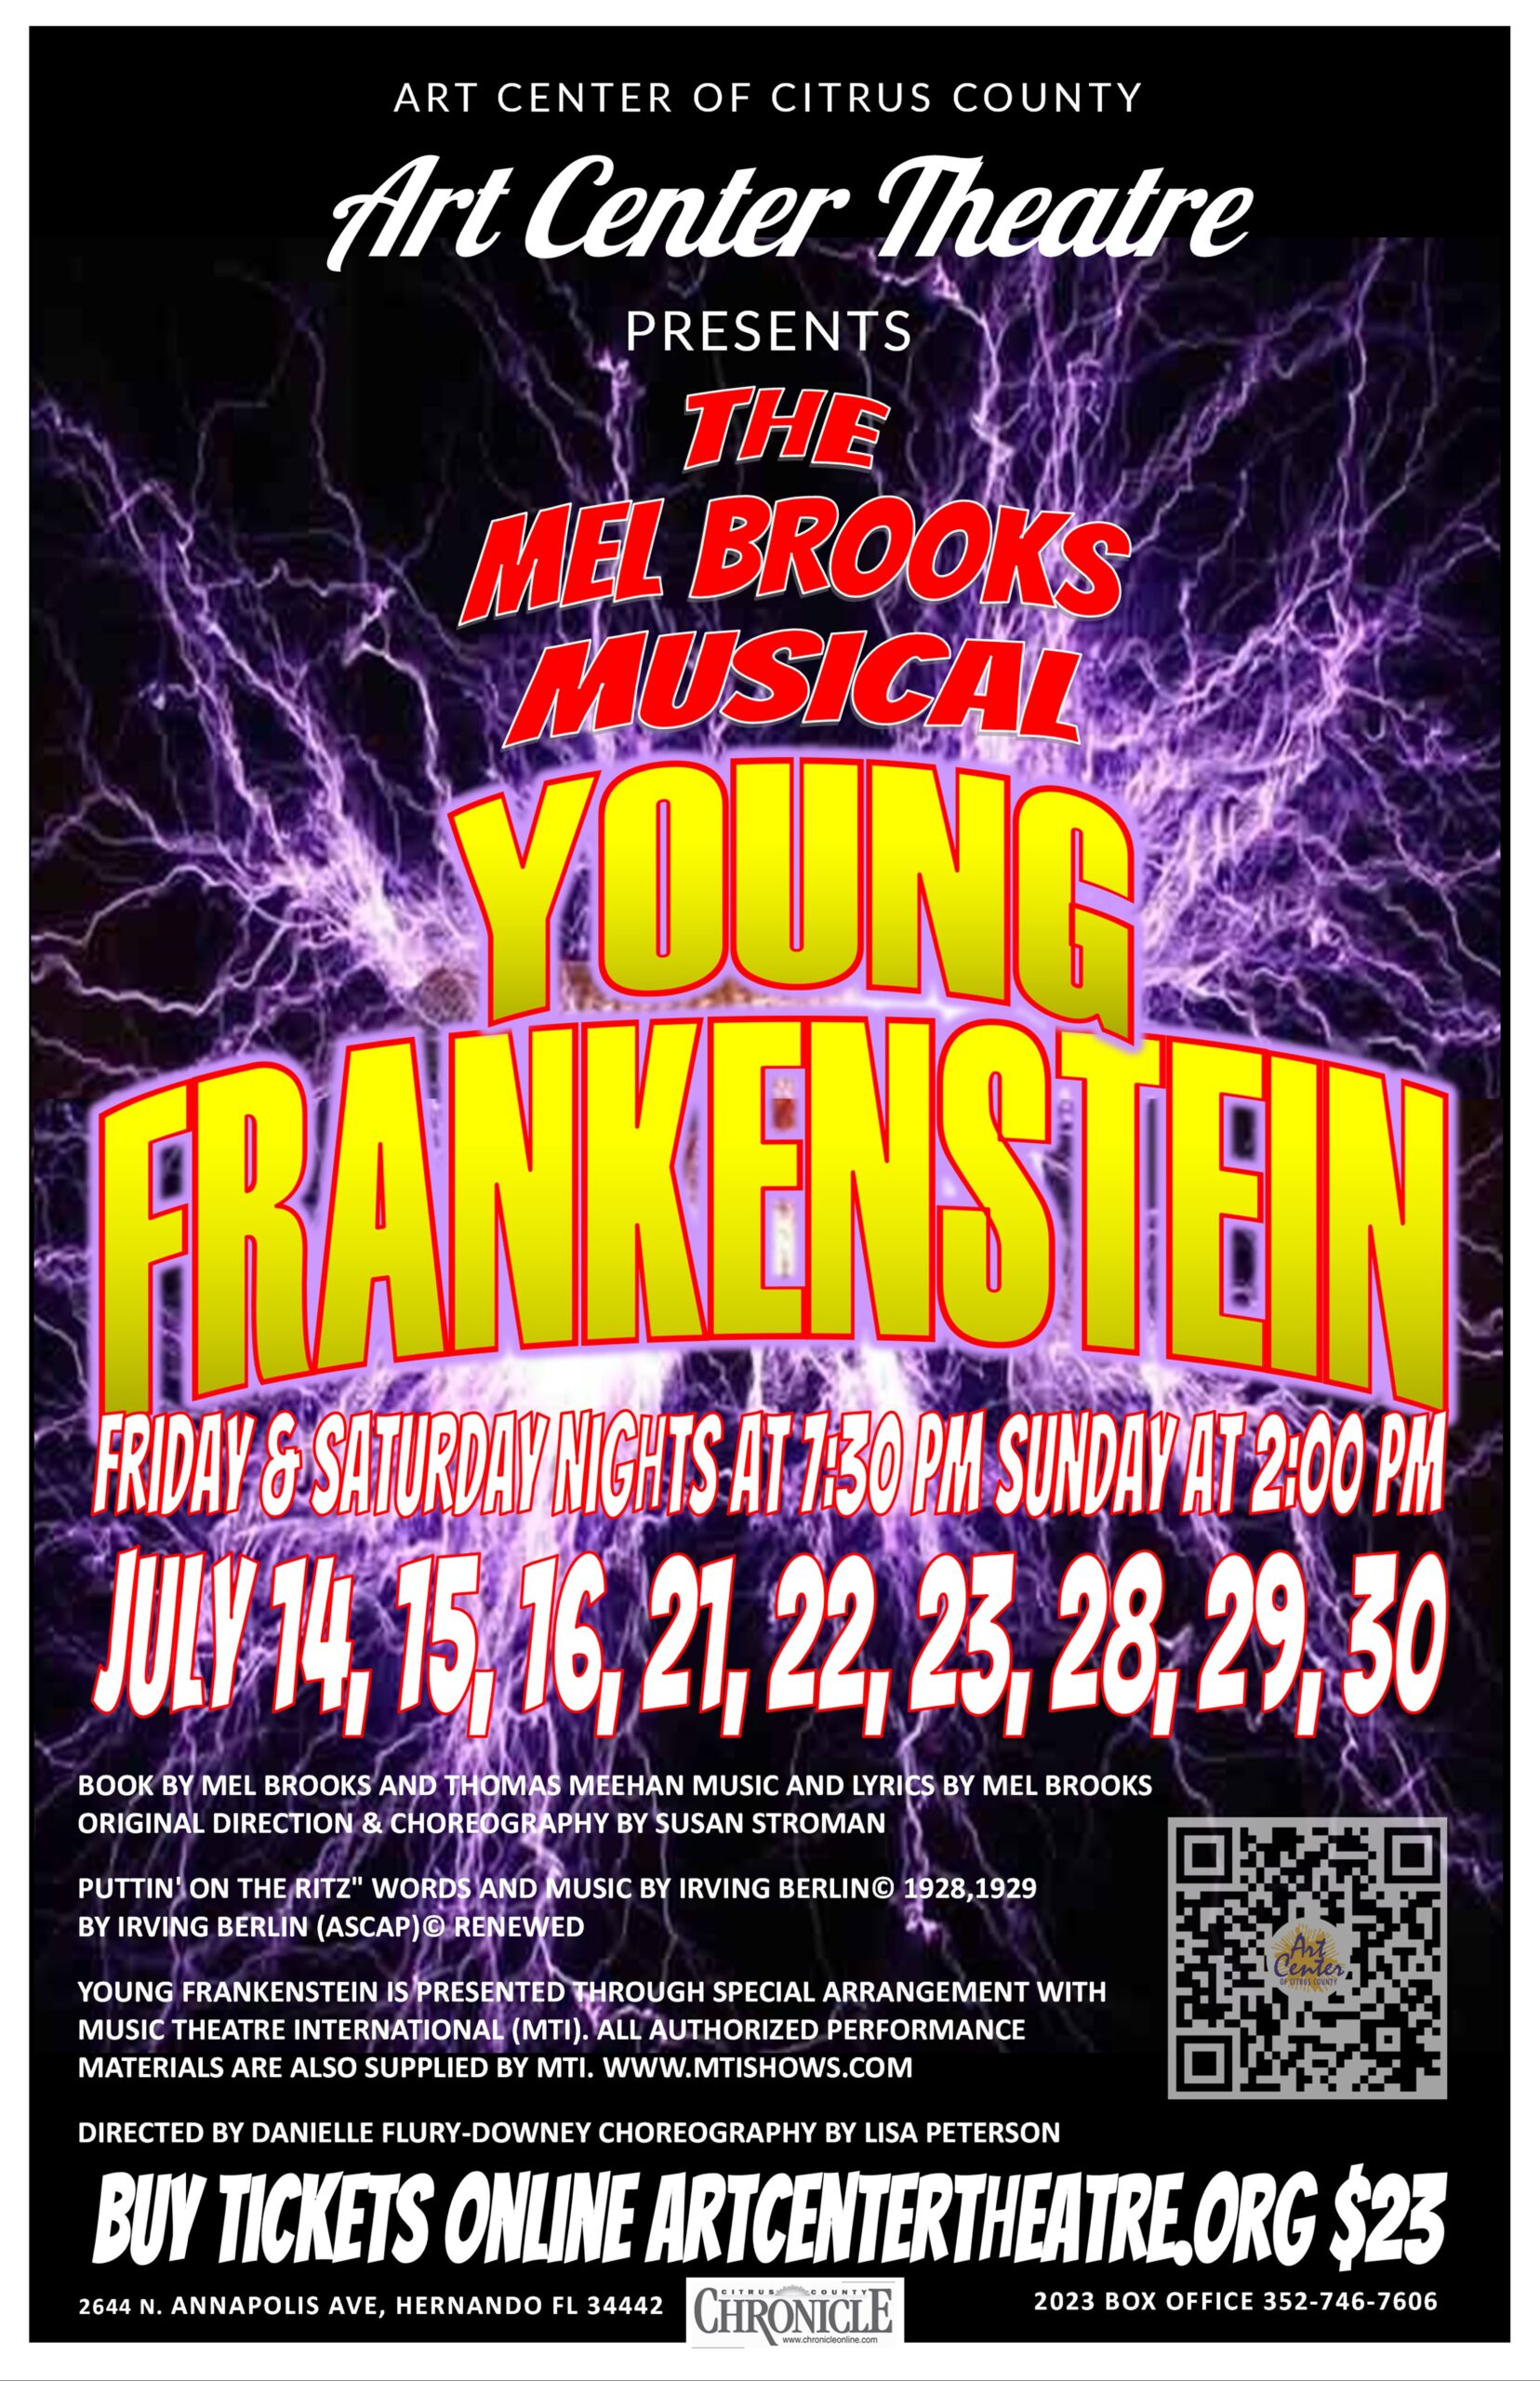 Art Center Theatre Presents: The Mel Brooks Musical Young Frankenstein